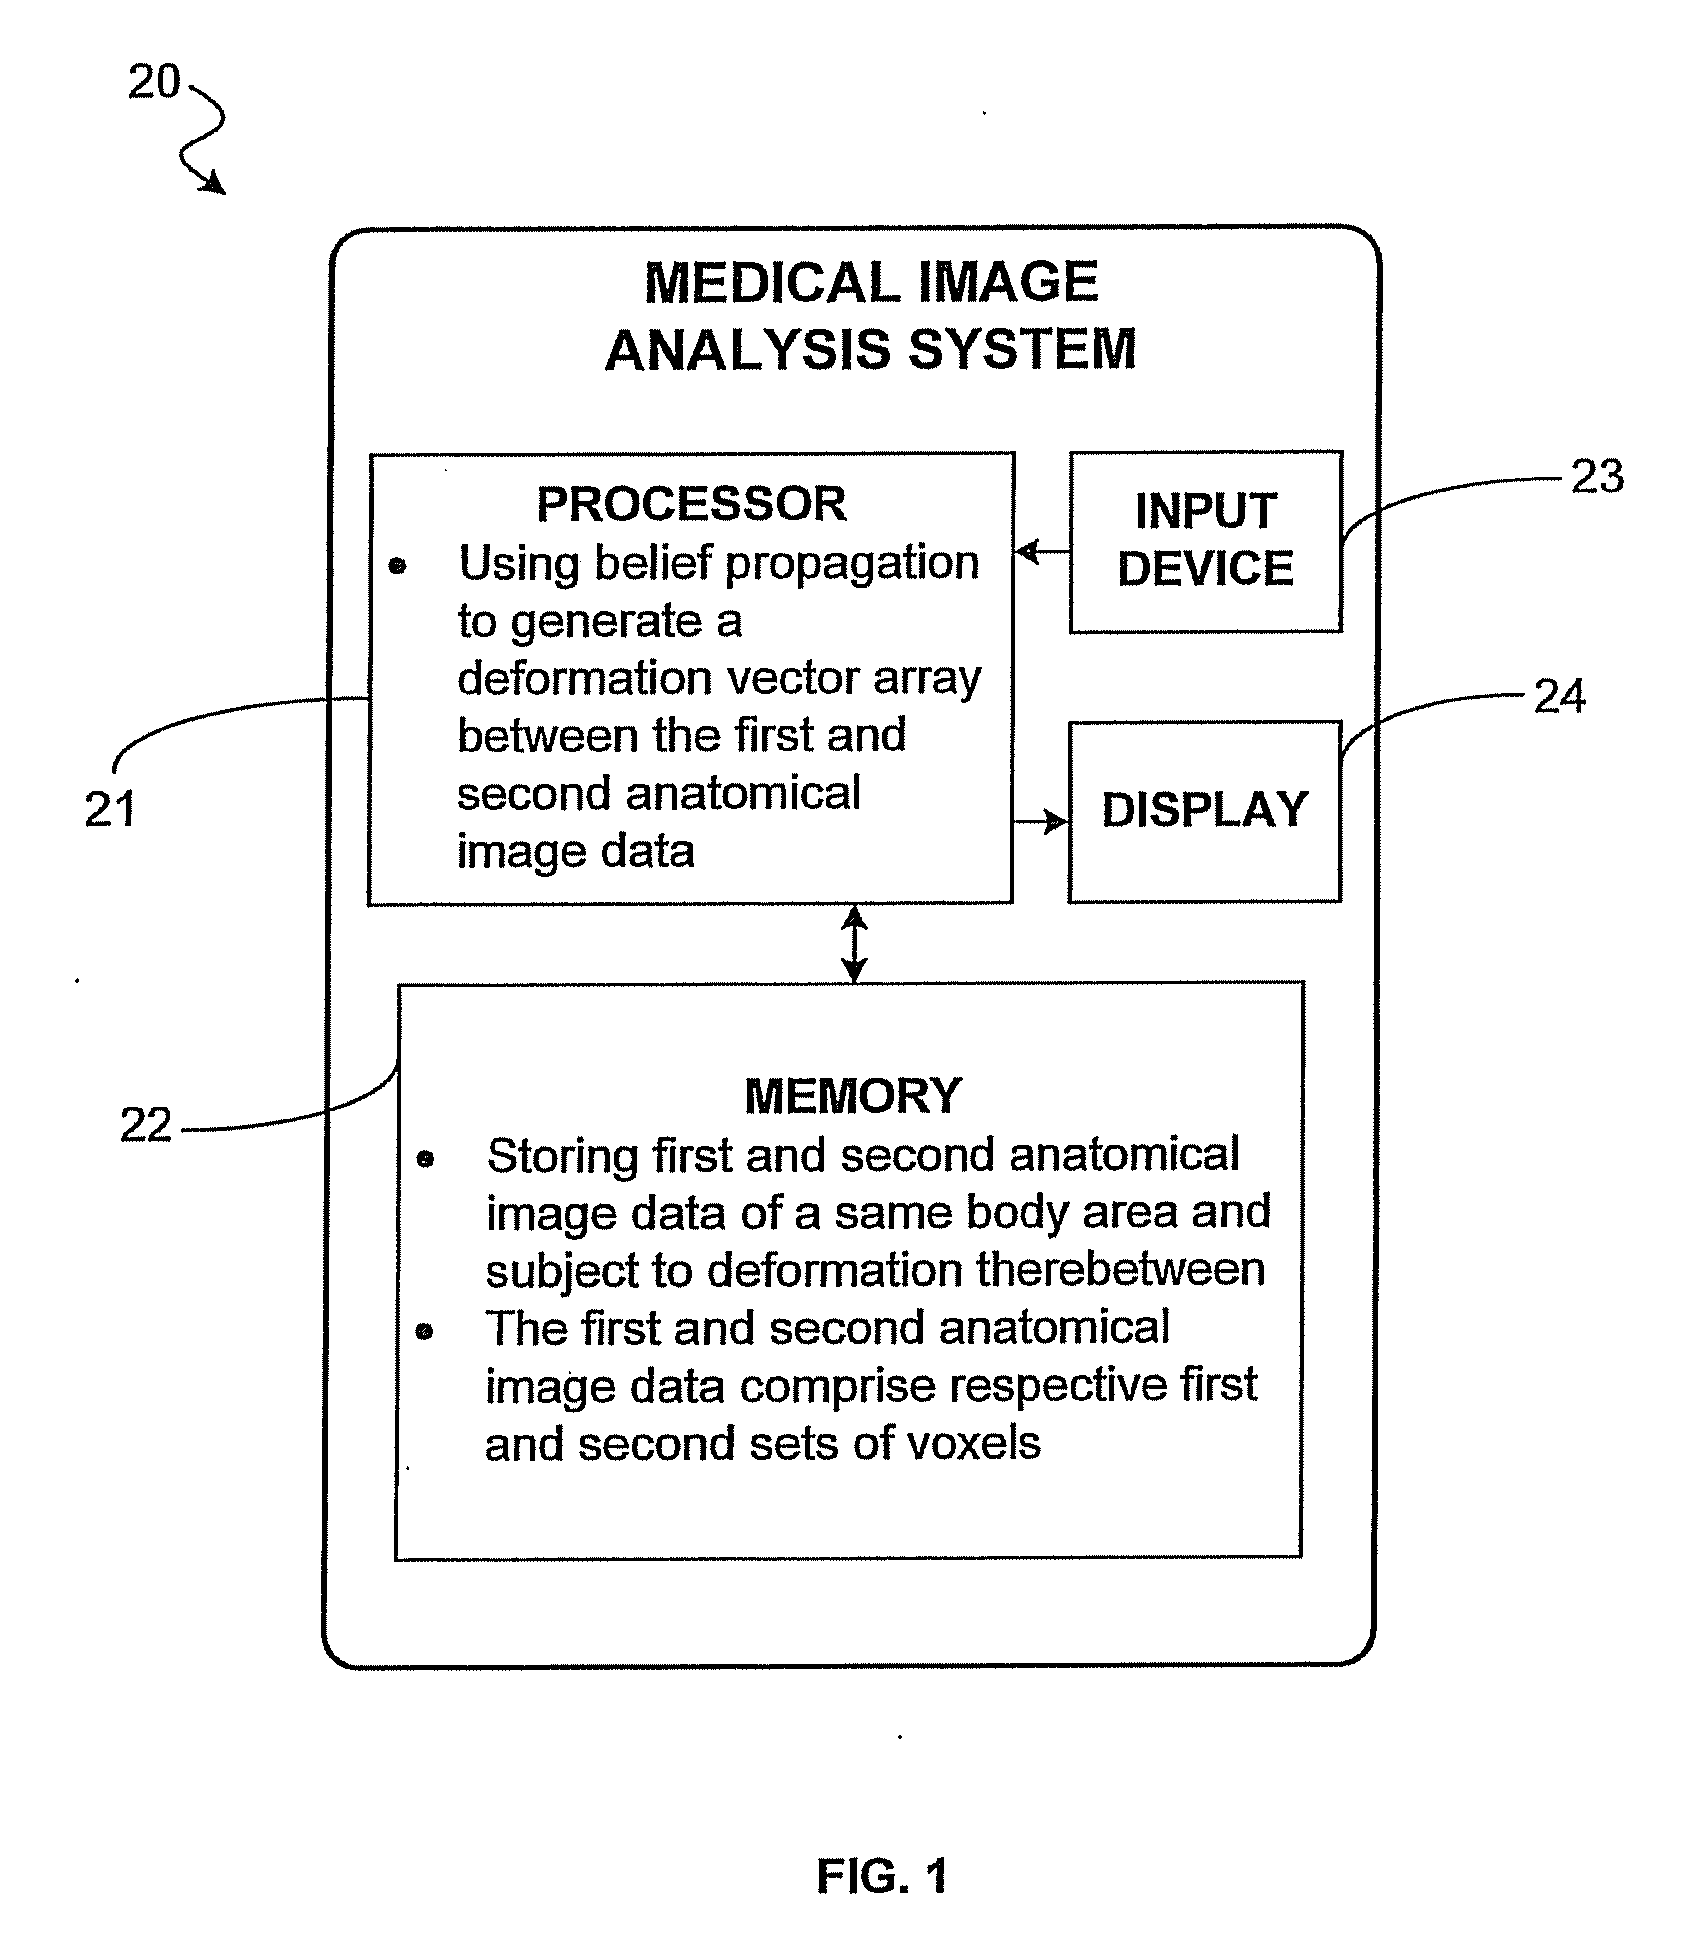 Medical image analysis system for displaying anatomical images subject to deformation and related methods